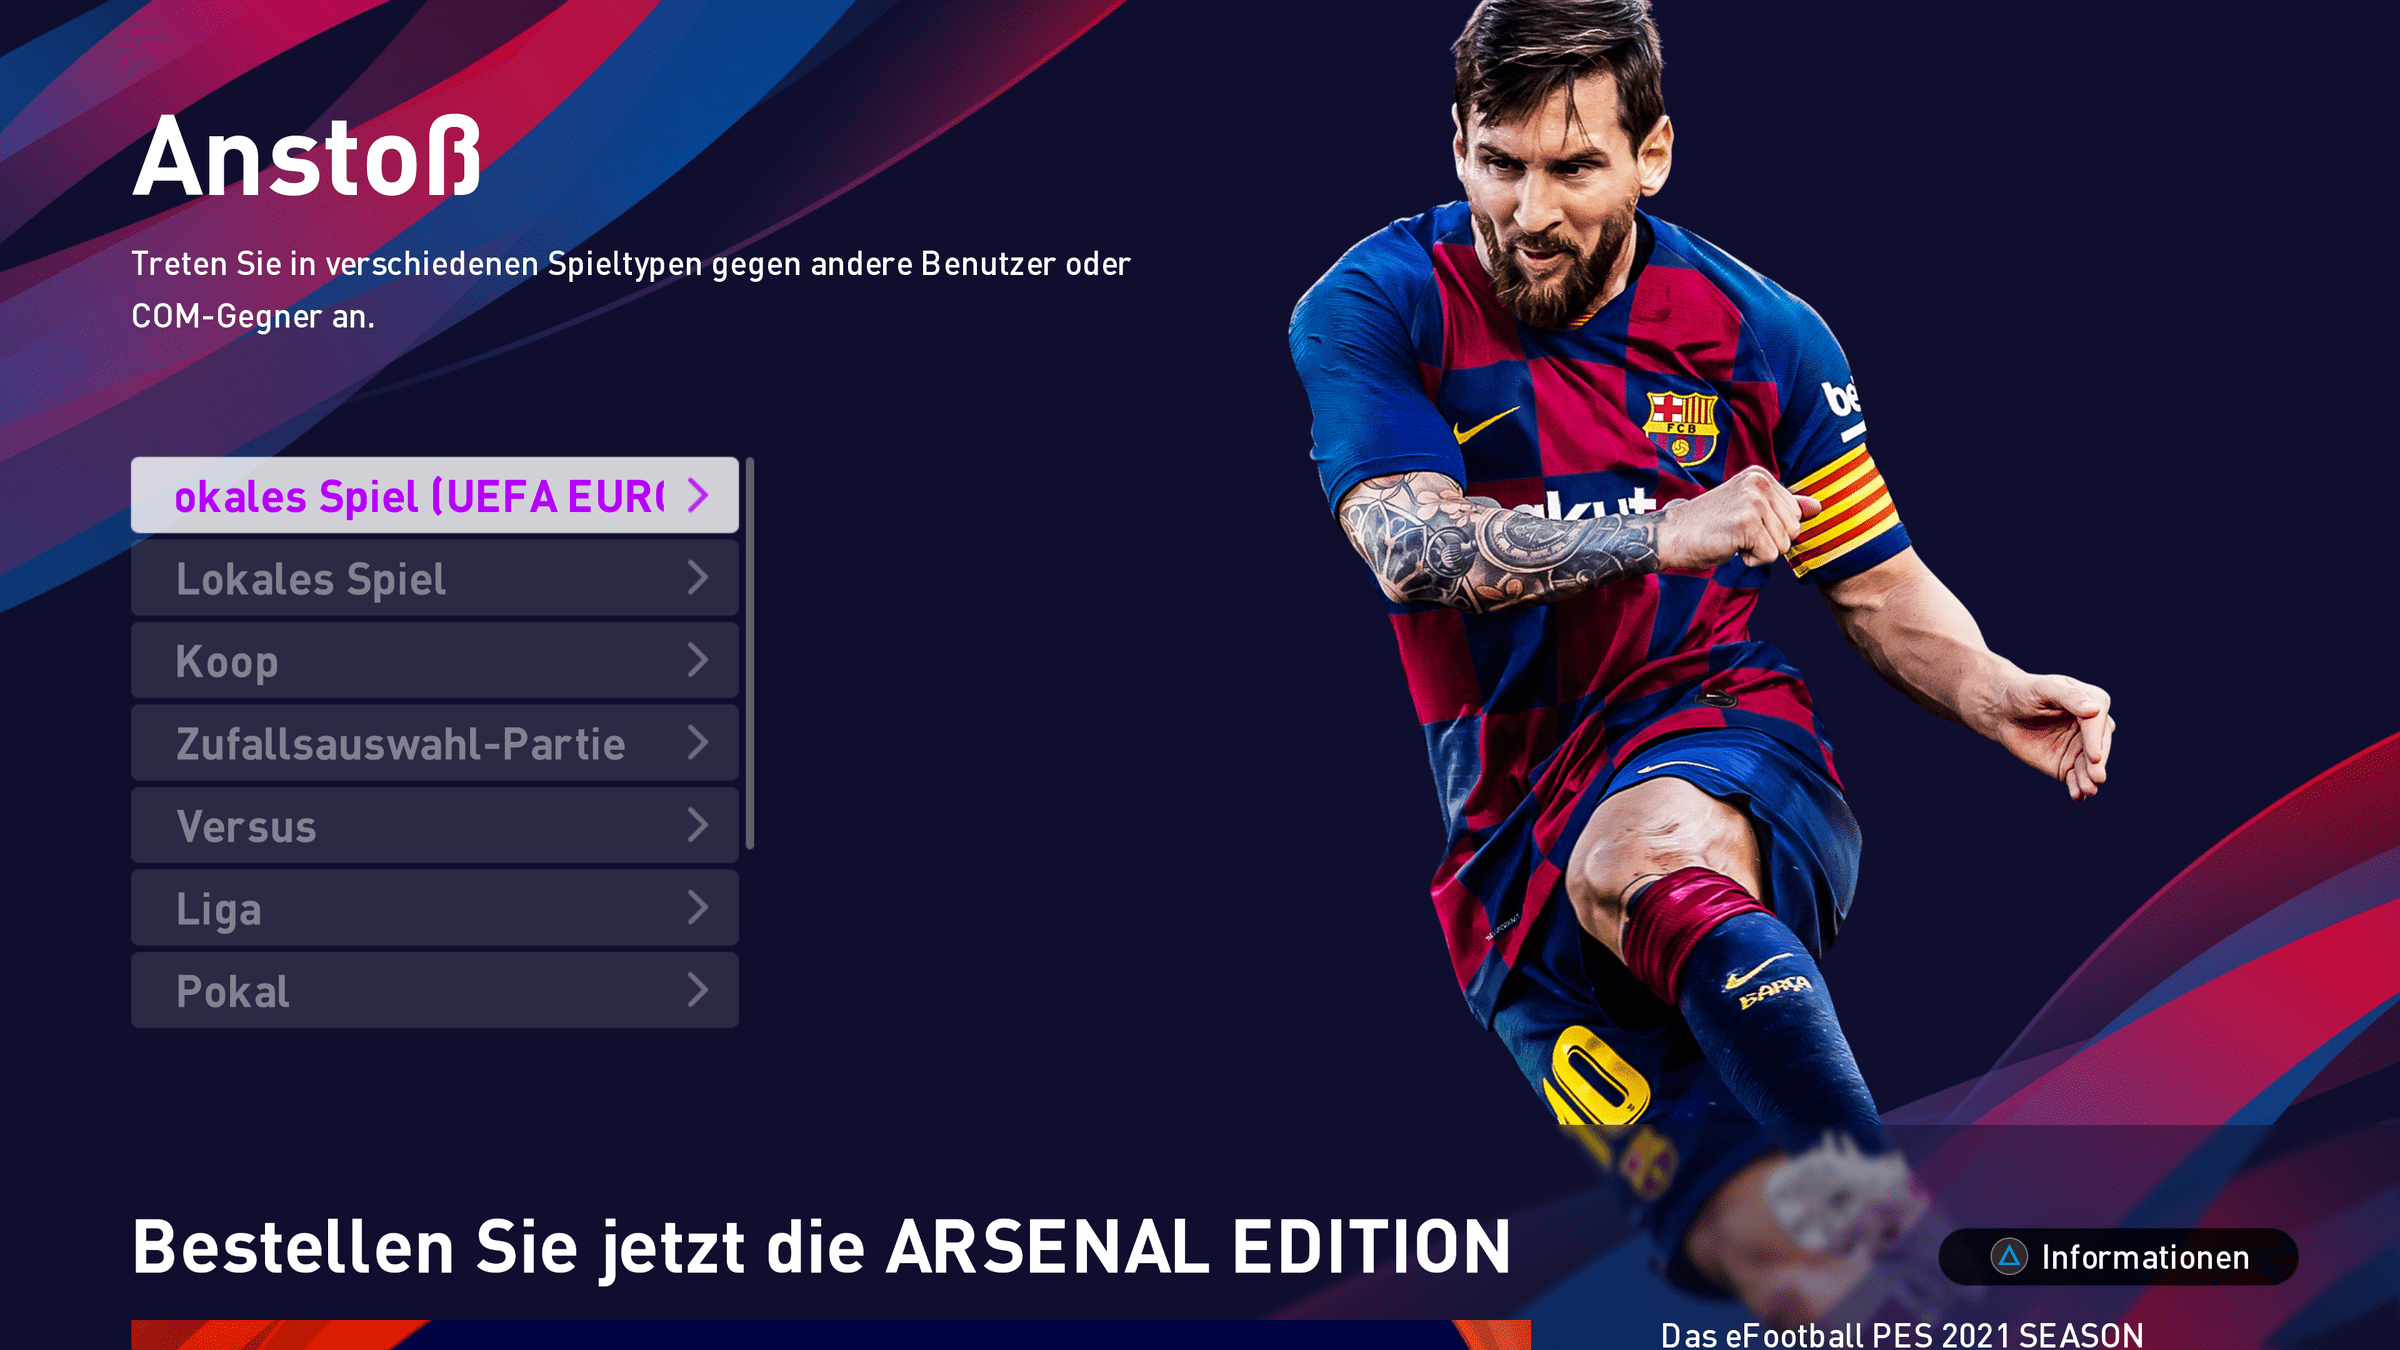 efootball pes 2021 for android